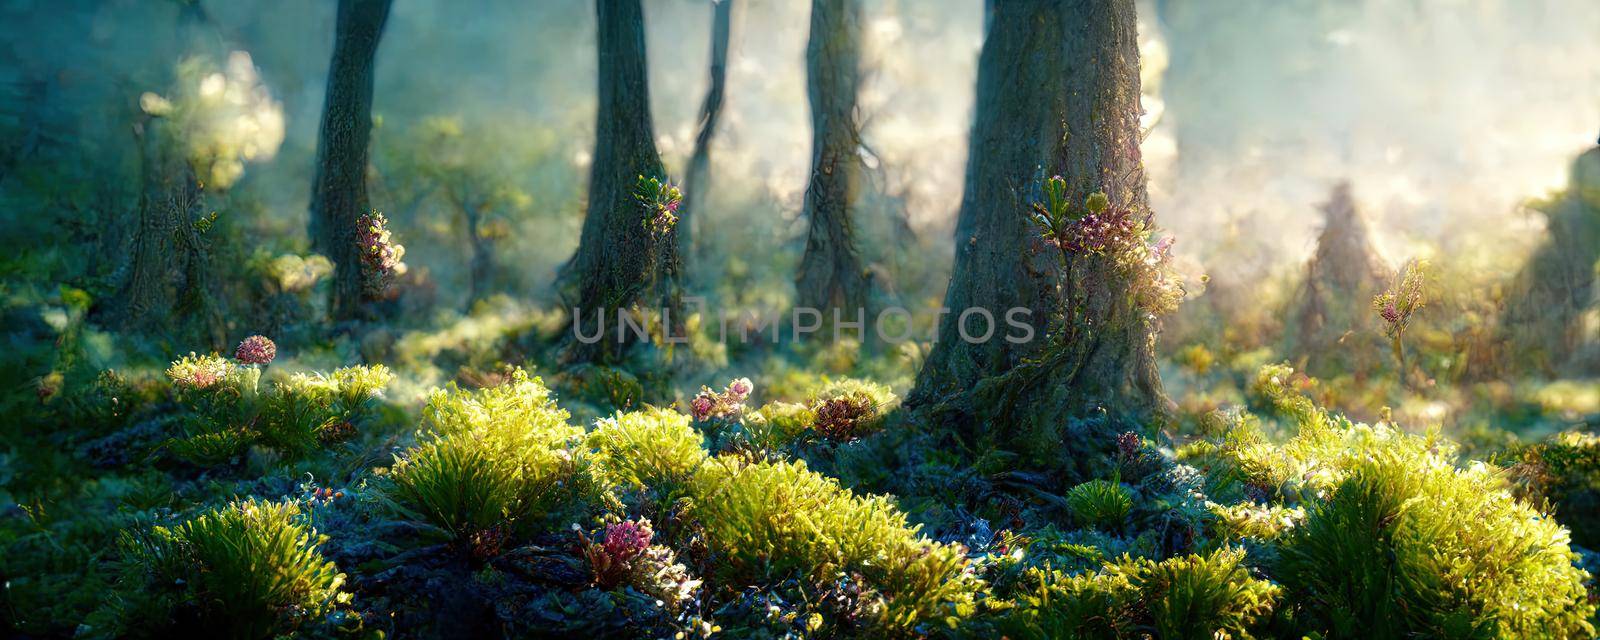 fantasy forest landscape with moss and trees.